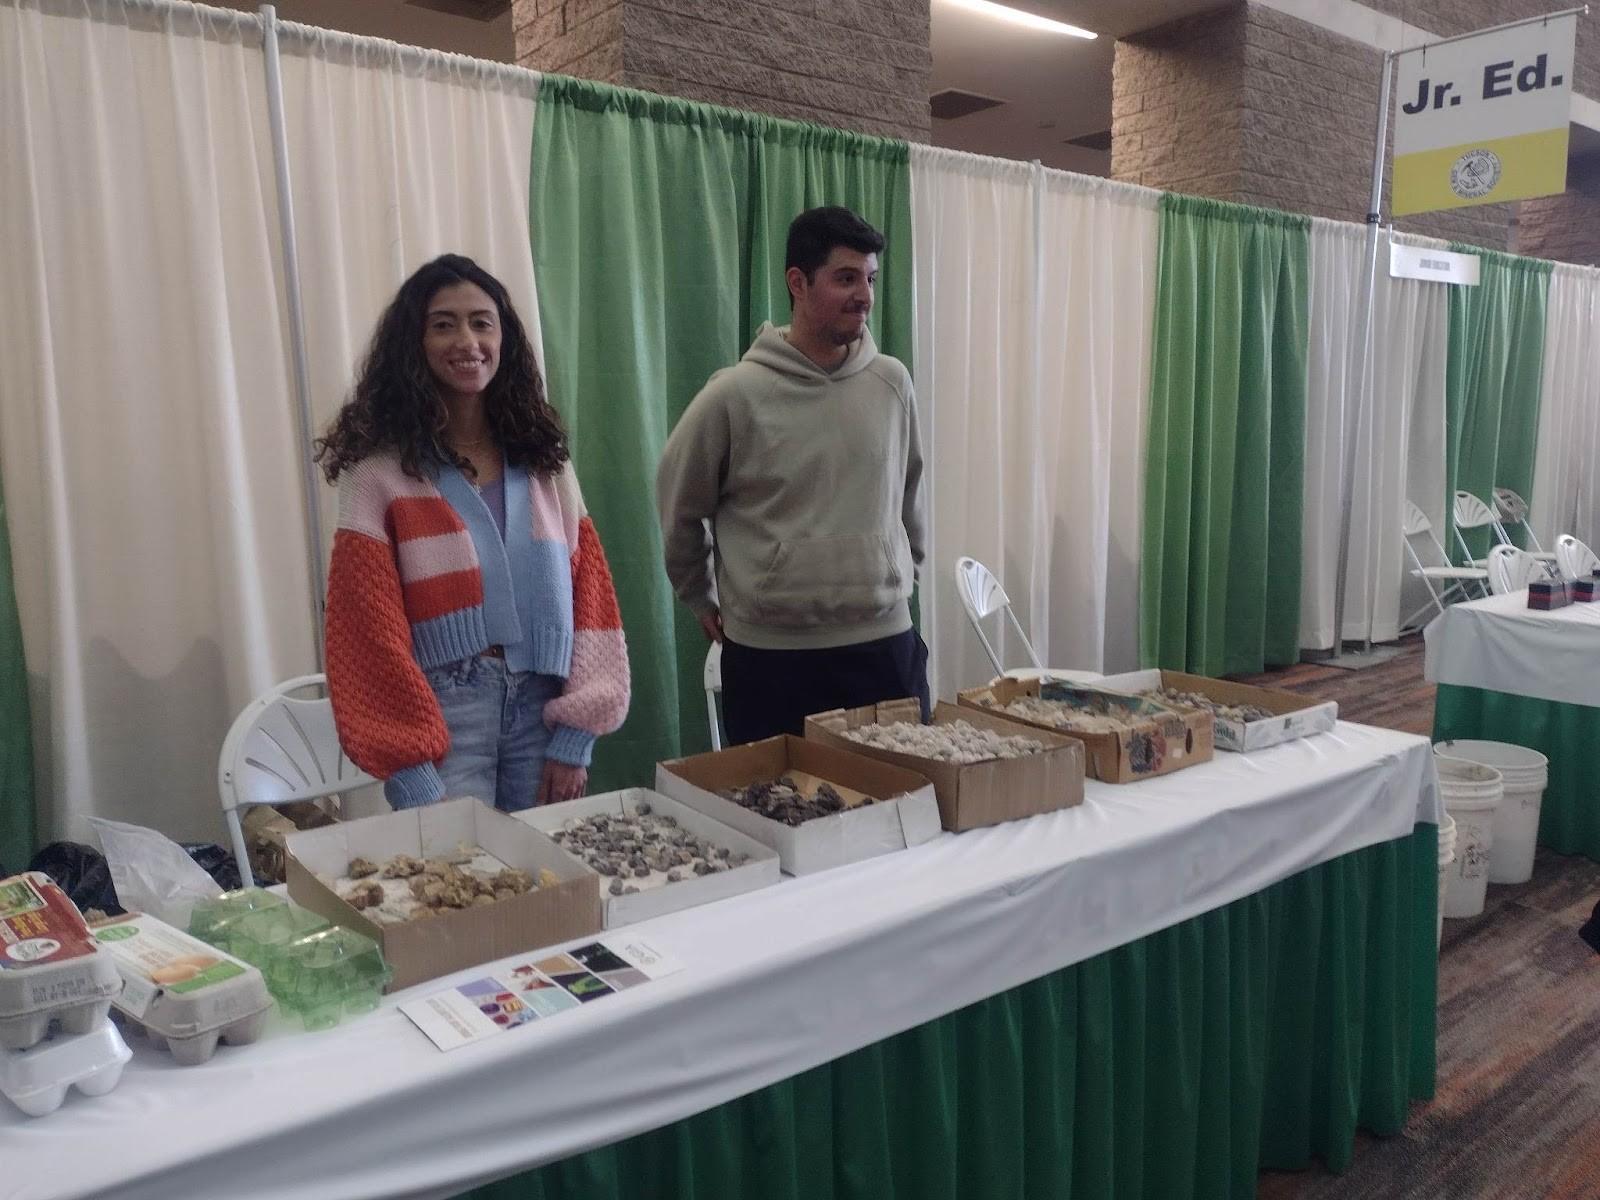 Dana Assudmi volunteers at the Junior Education Center at the Gem and Mineral Show in Tucson, on Feb. 10. The Center is hosted by the Society of Earth Science Students Club.